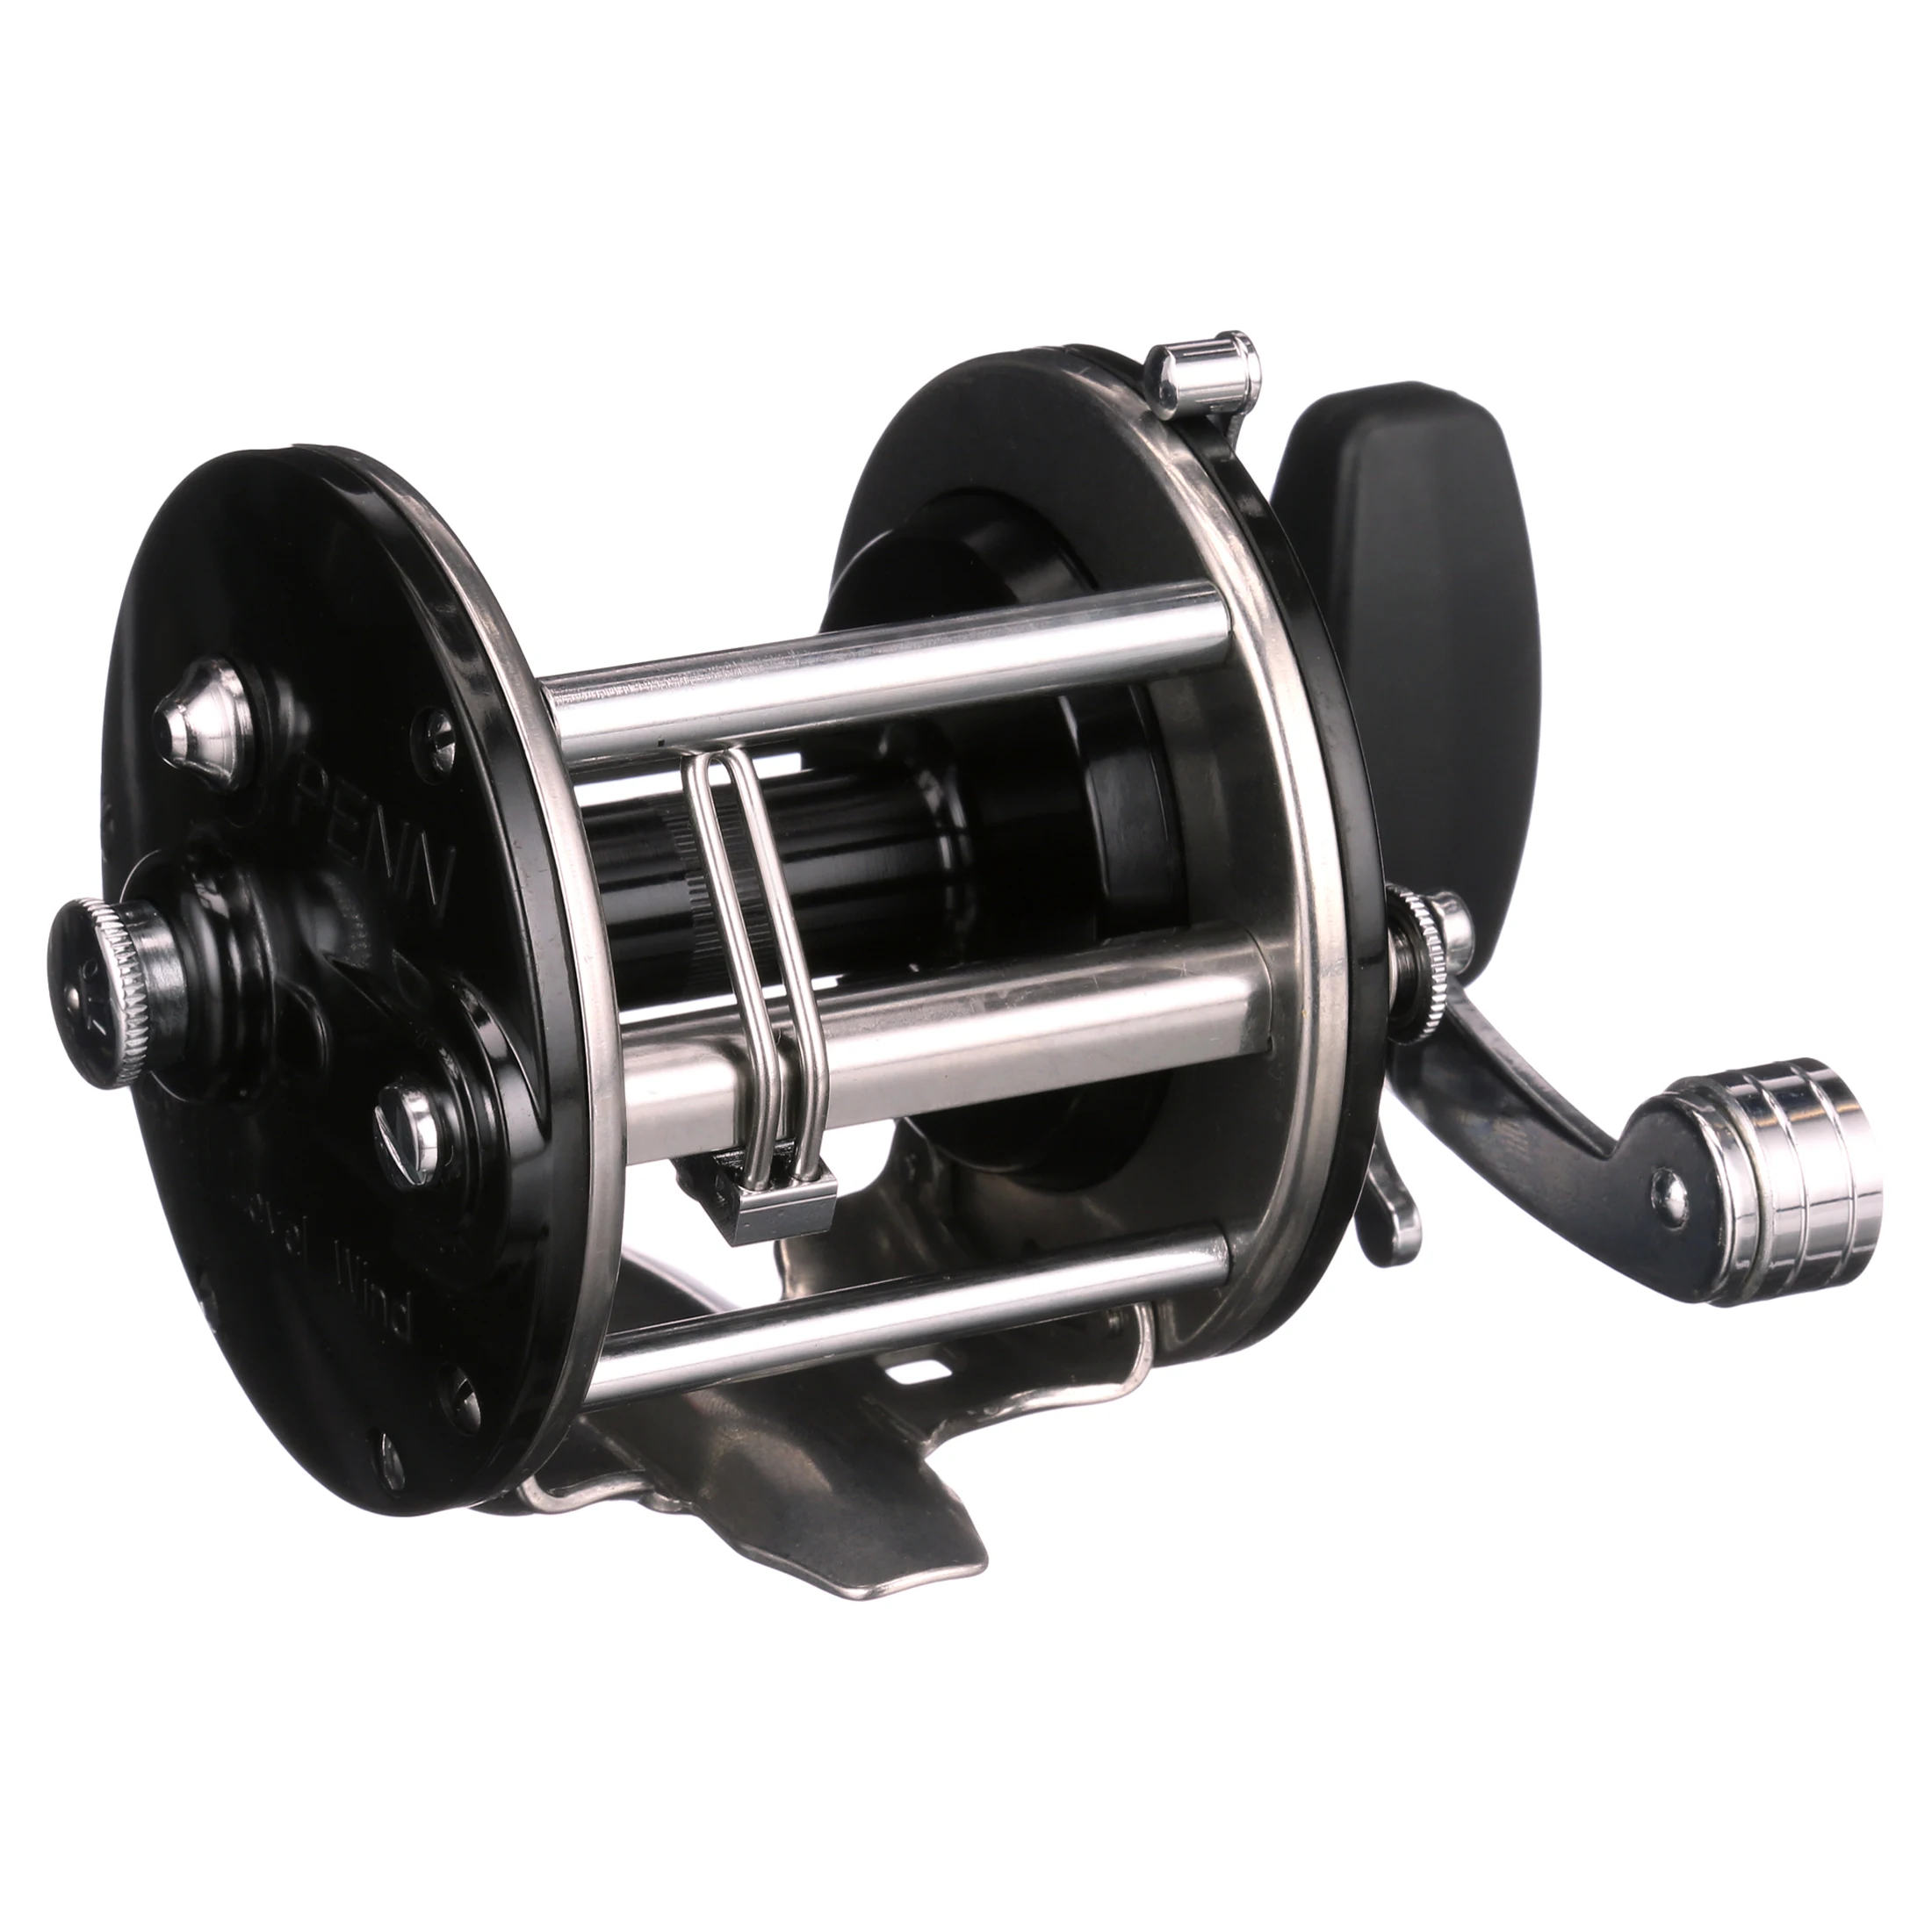 General Purpose Level Wind Left Hand 209M Conventional Fishing Reel enlarge